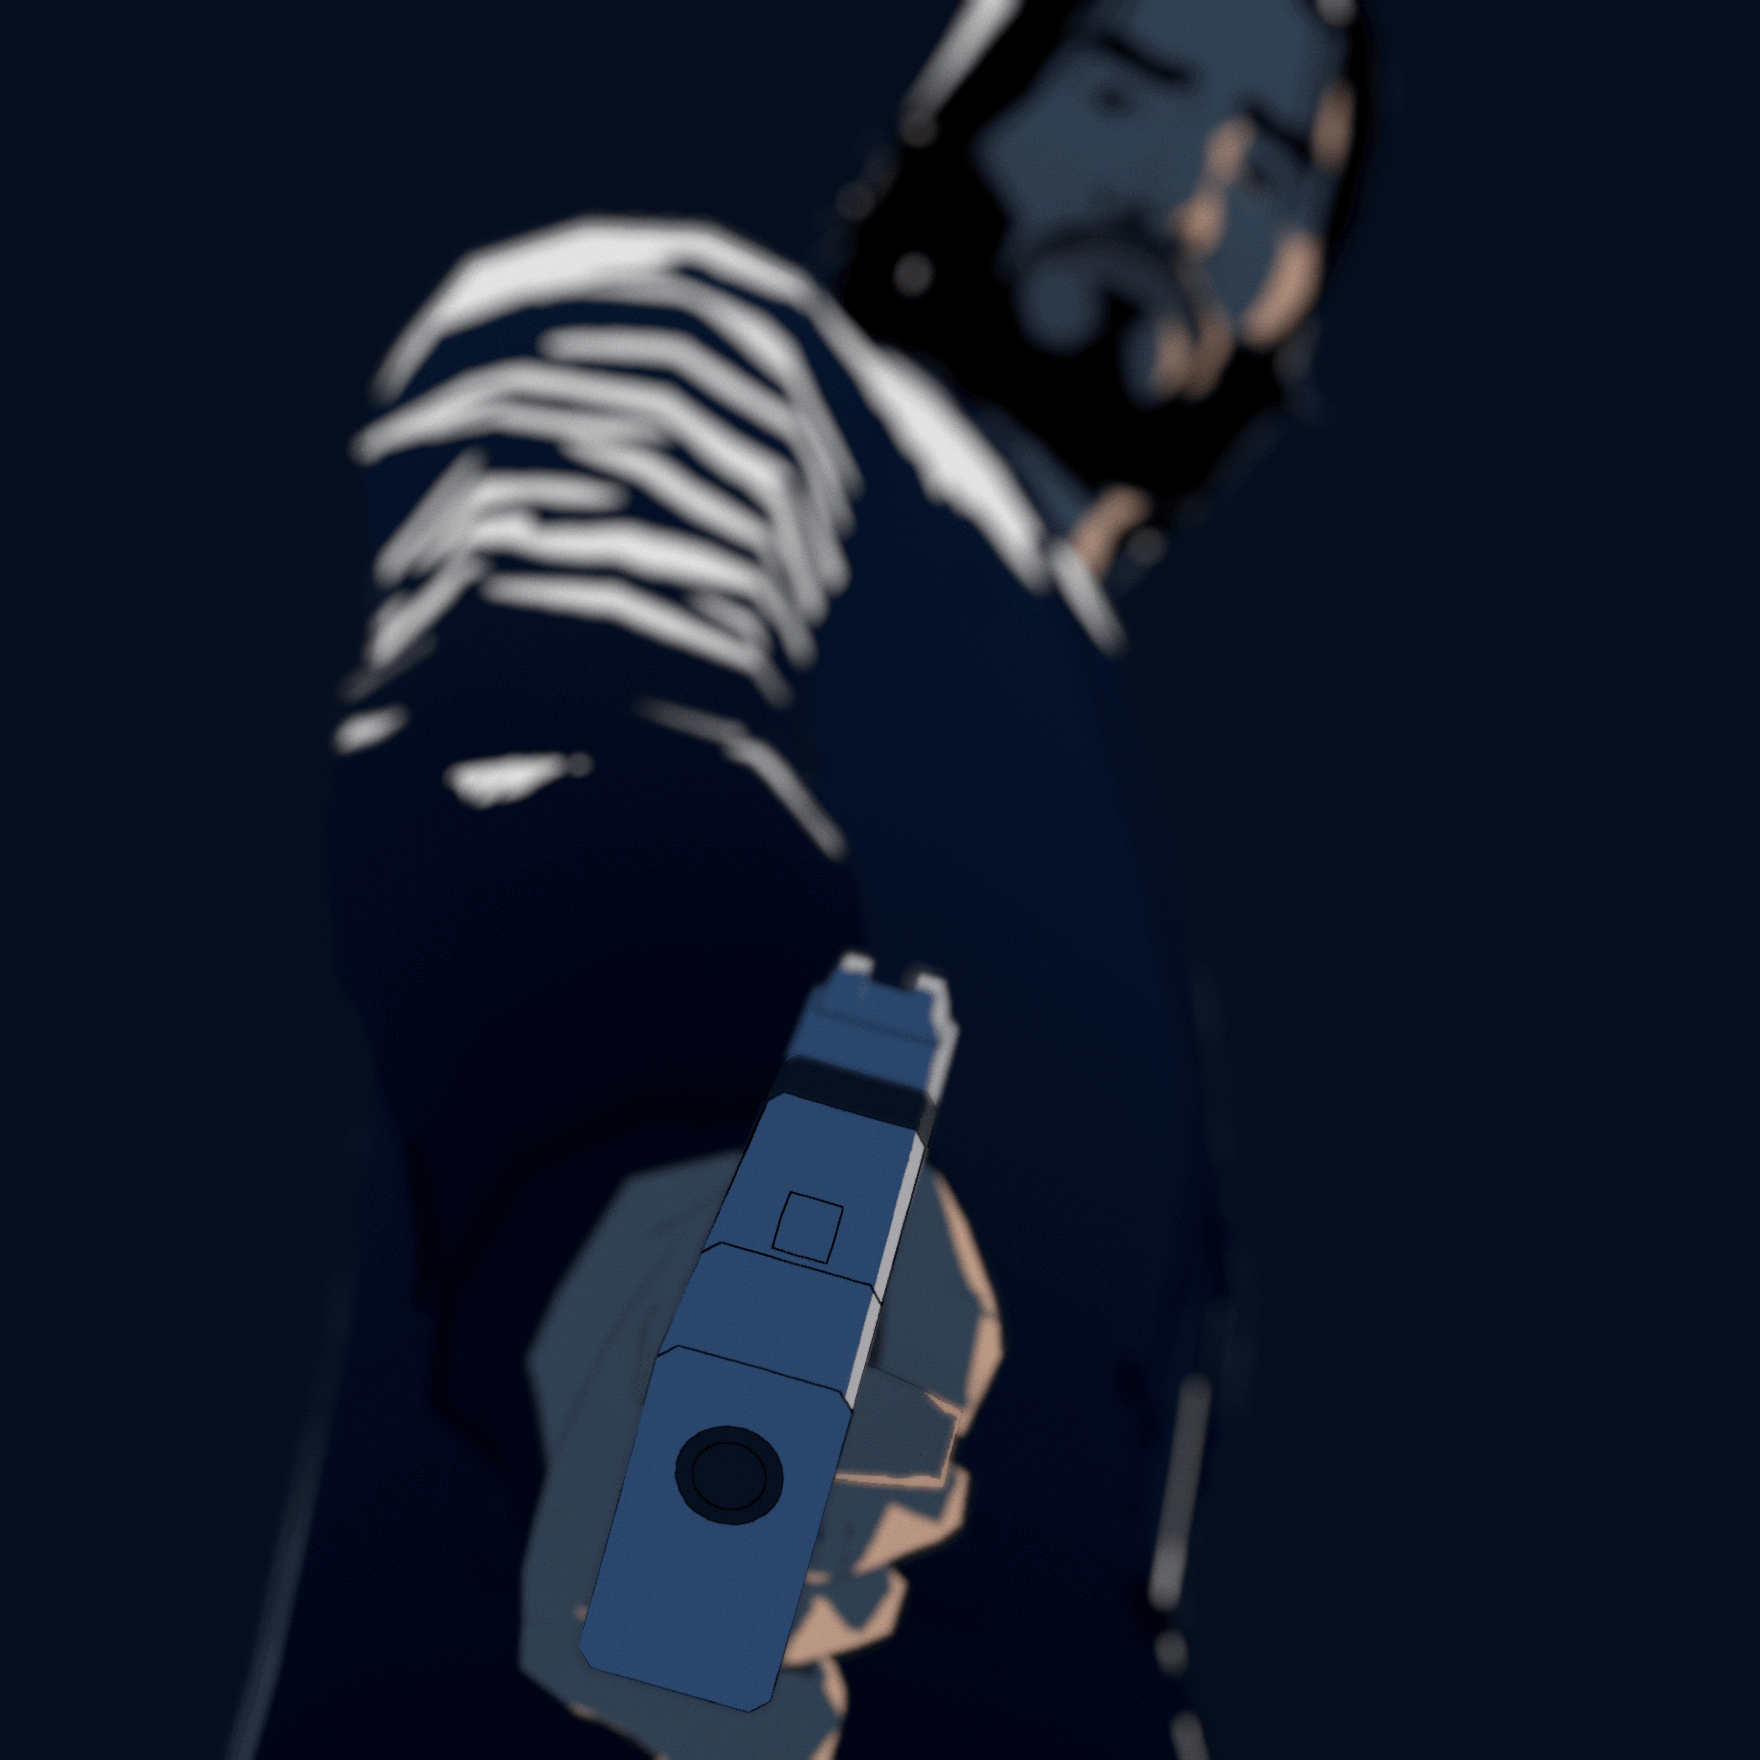 Image for John Wick Hex releases October 8 on Mac and PC through the Epic Games Store